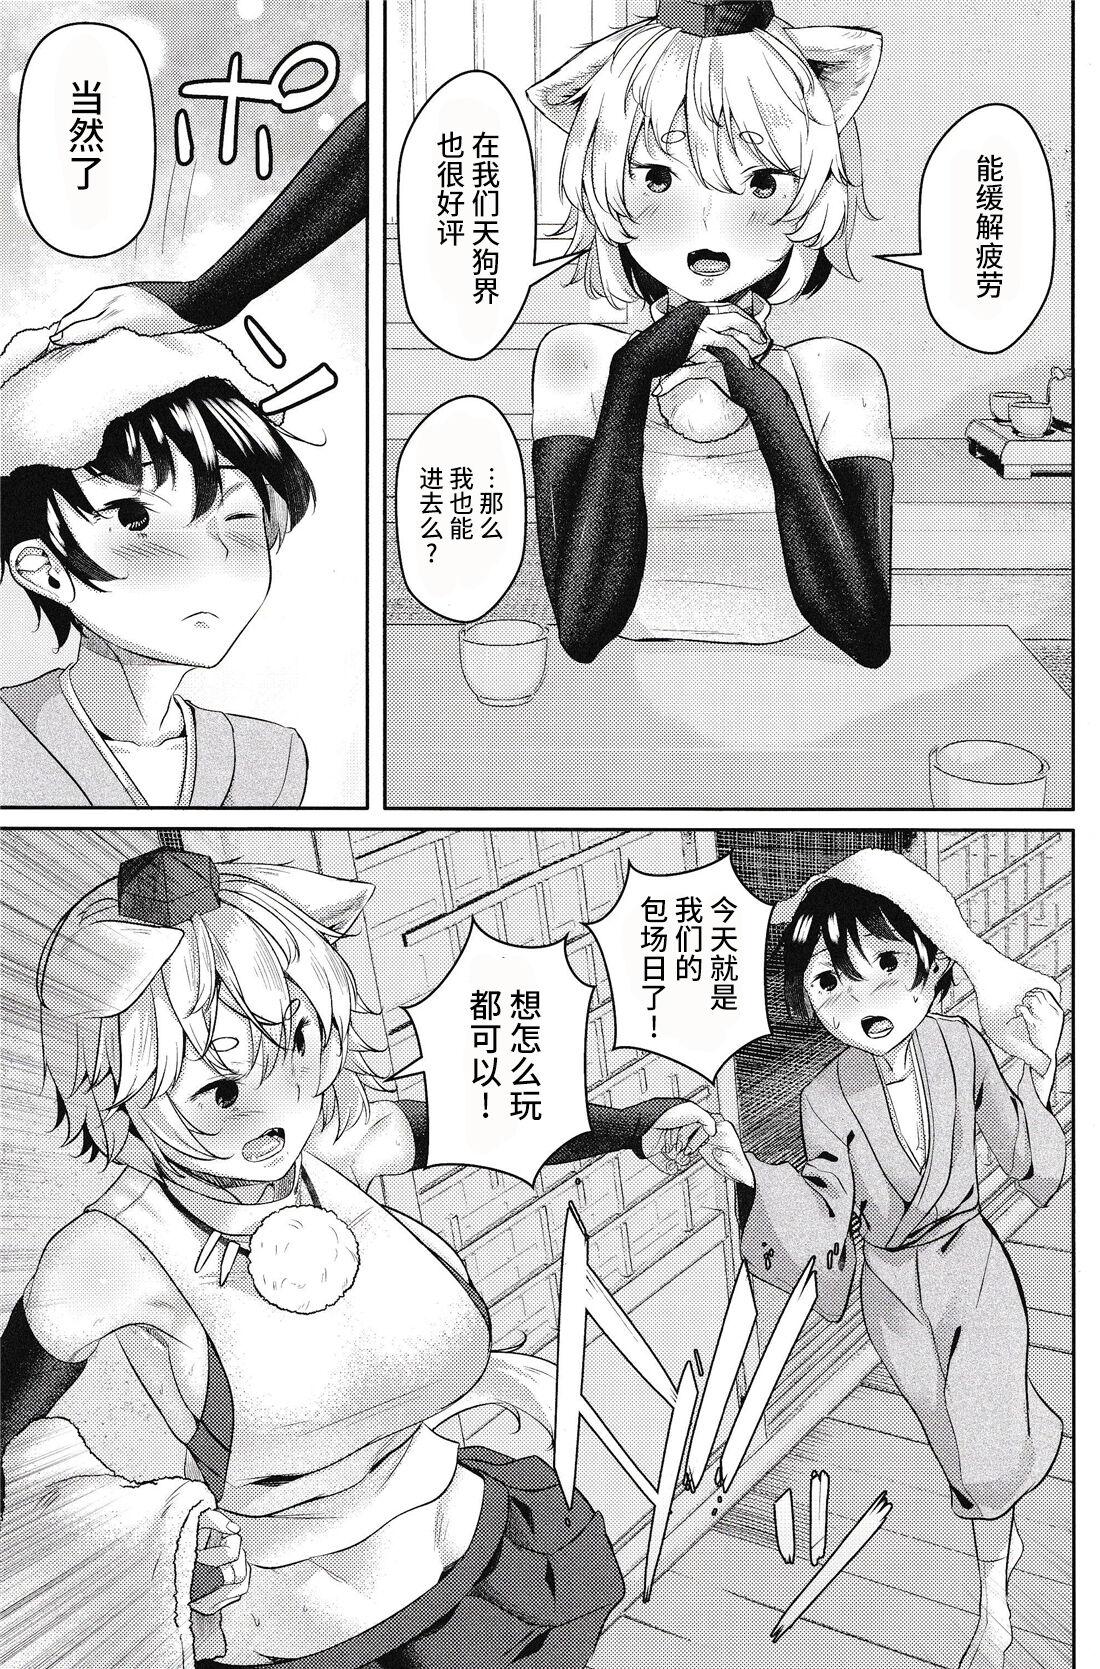 Blowing 犬のお姉ちゃんと温泉旅行 - Touhou project Curvy - Page 5